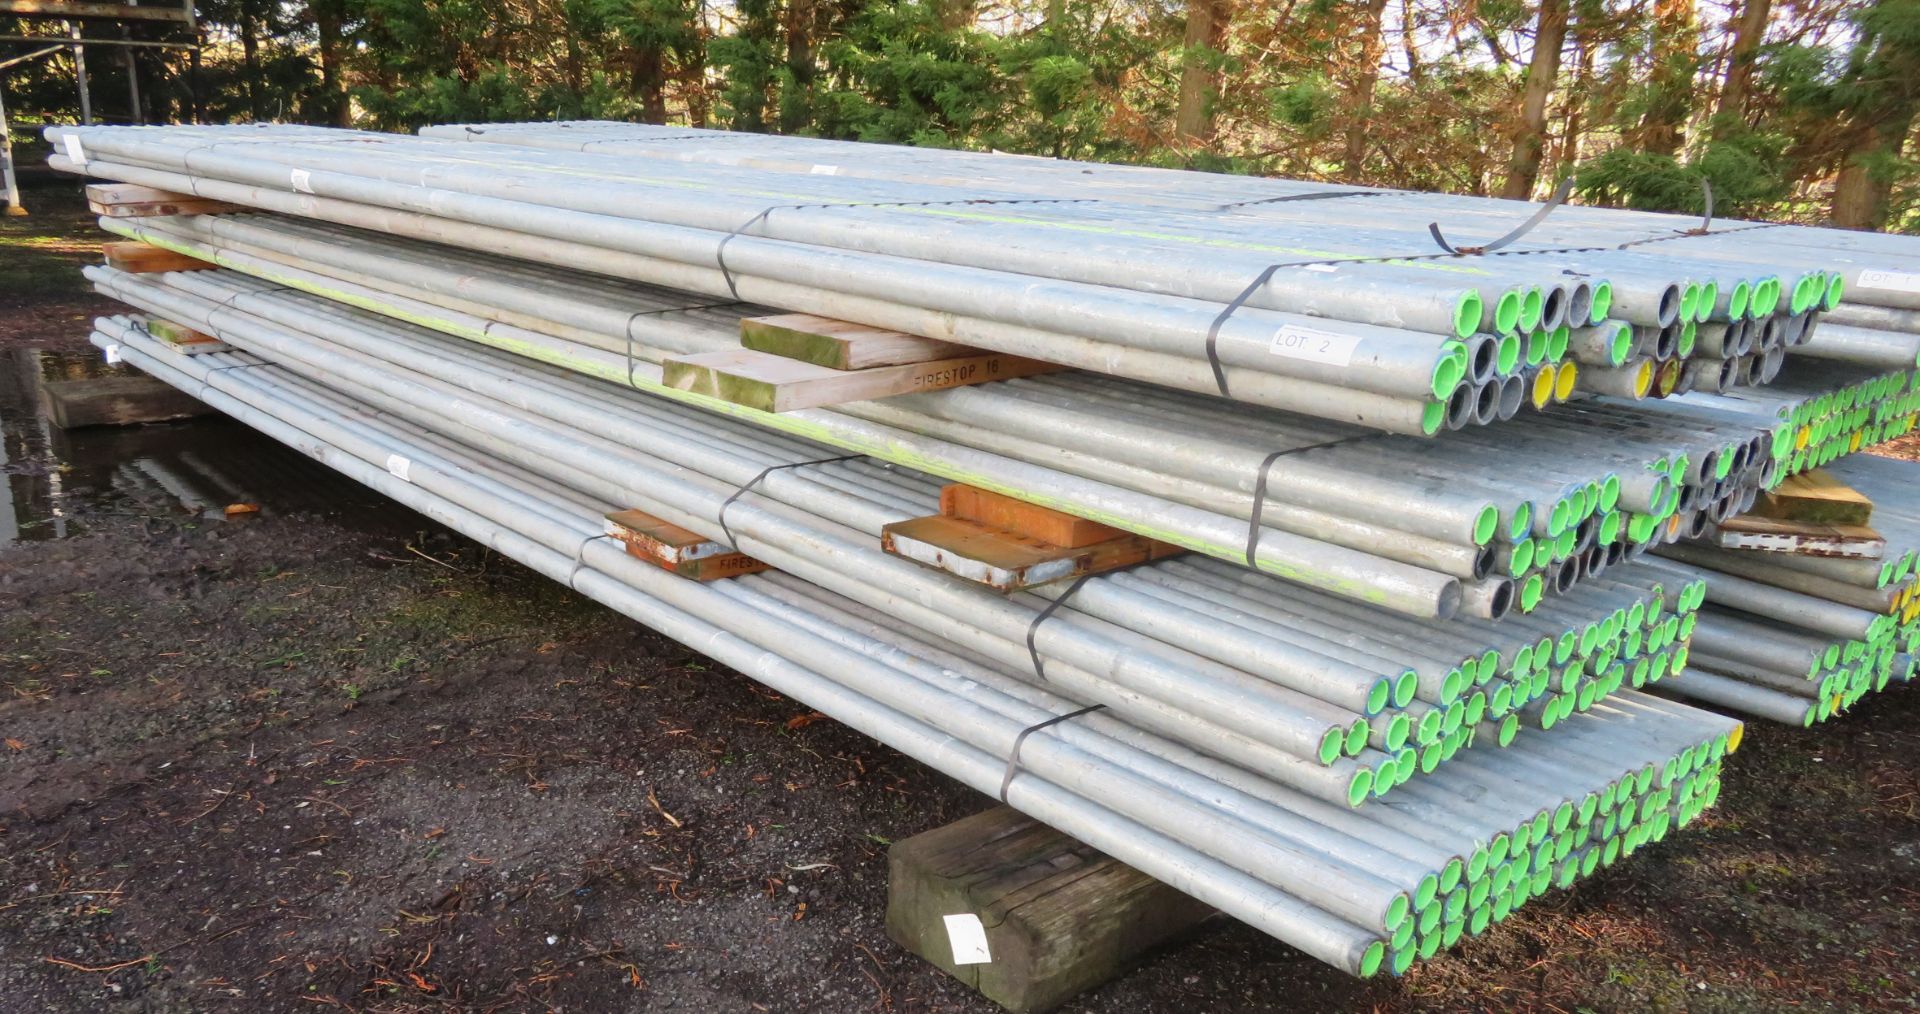 200x 16ft Galvanised Steel Scaffolding Poles 48mm Diameter x 4mm Thick. - Image 2 of 4